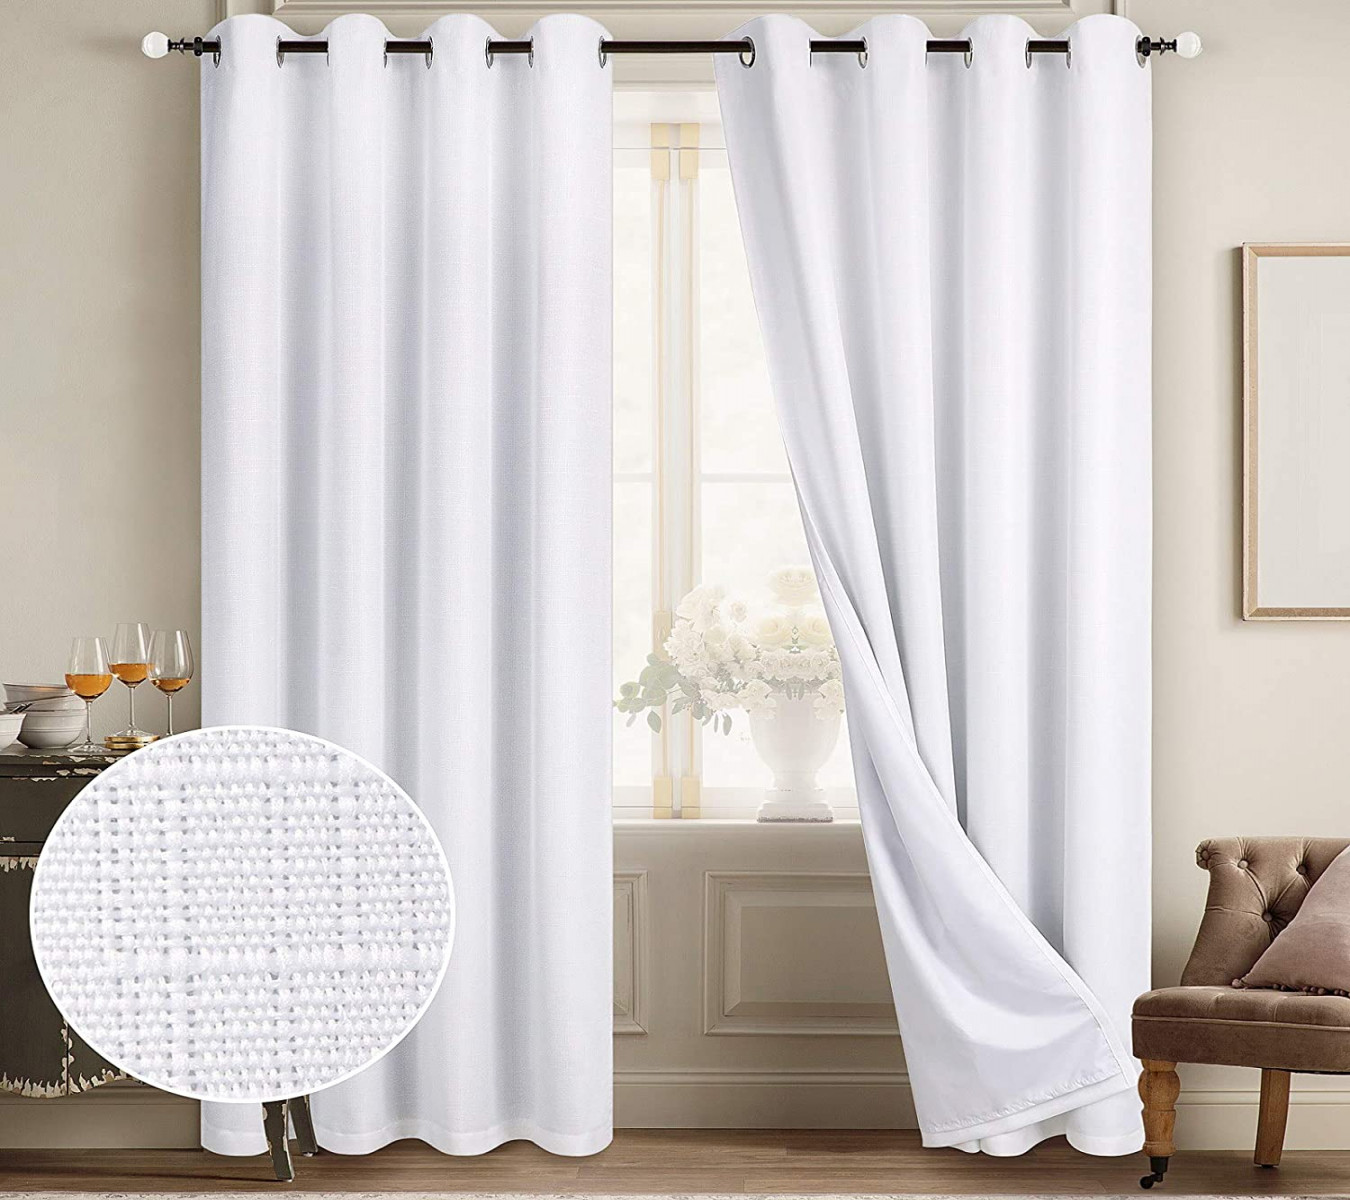 Diraysid % Blackout Curtains White Linen Curtains for Bedroom Eyelet  Thermal Insulated Room Darkening ( Panels W 5 x L  Inches)